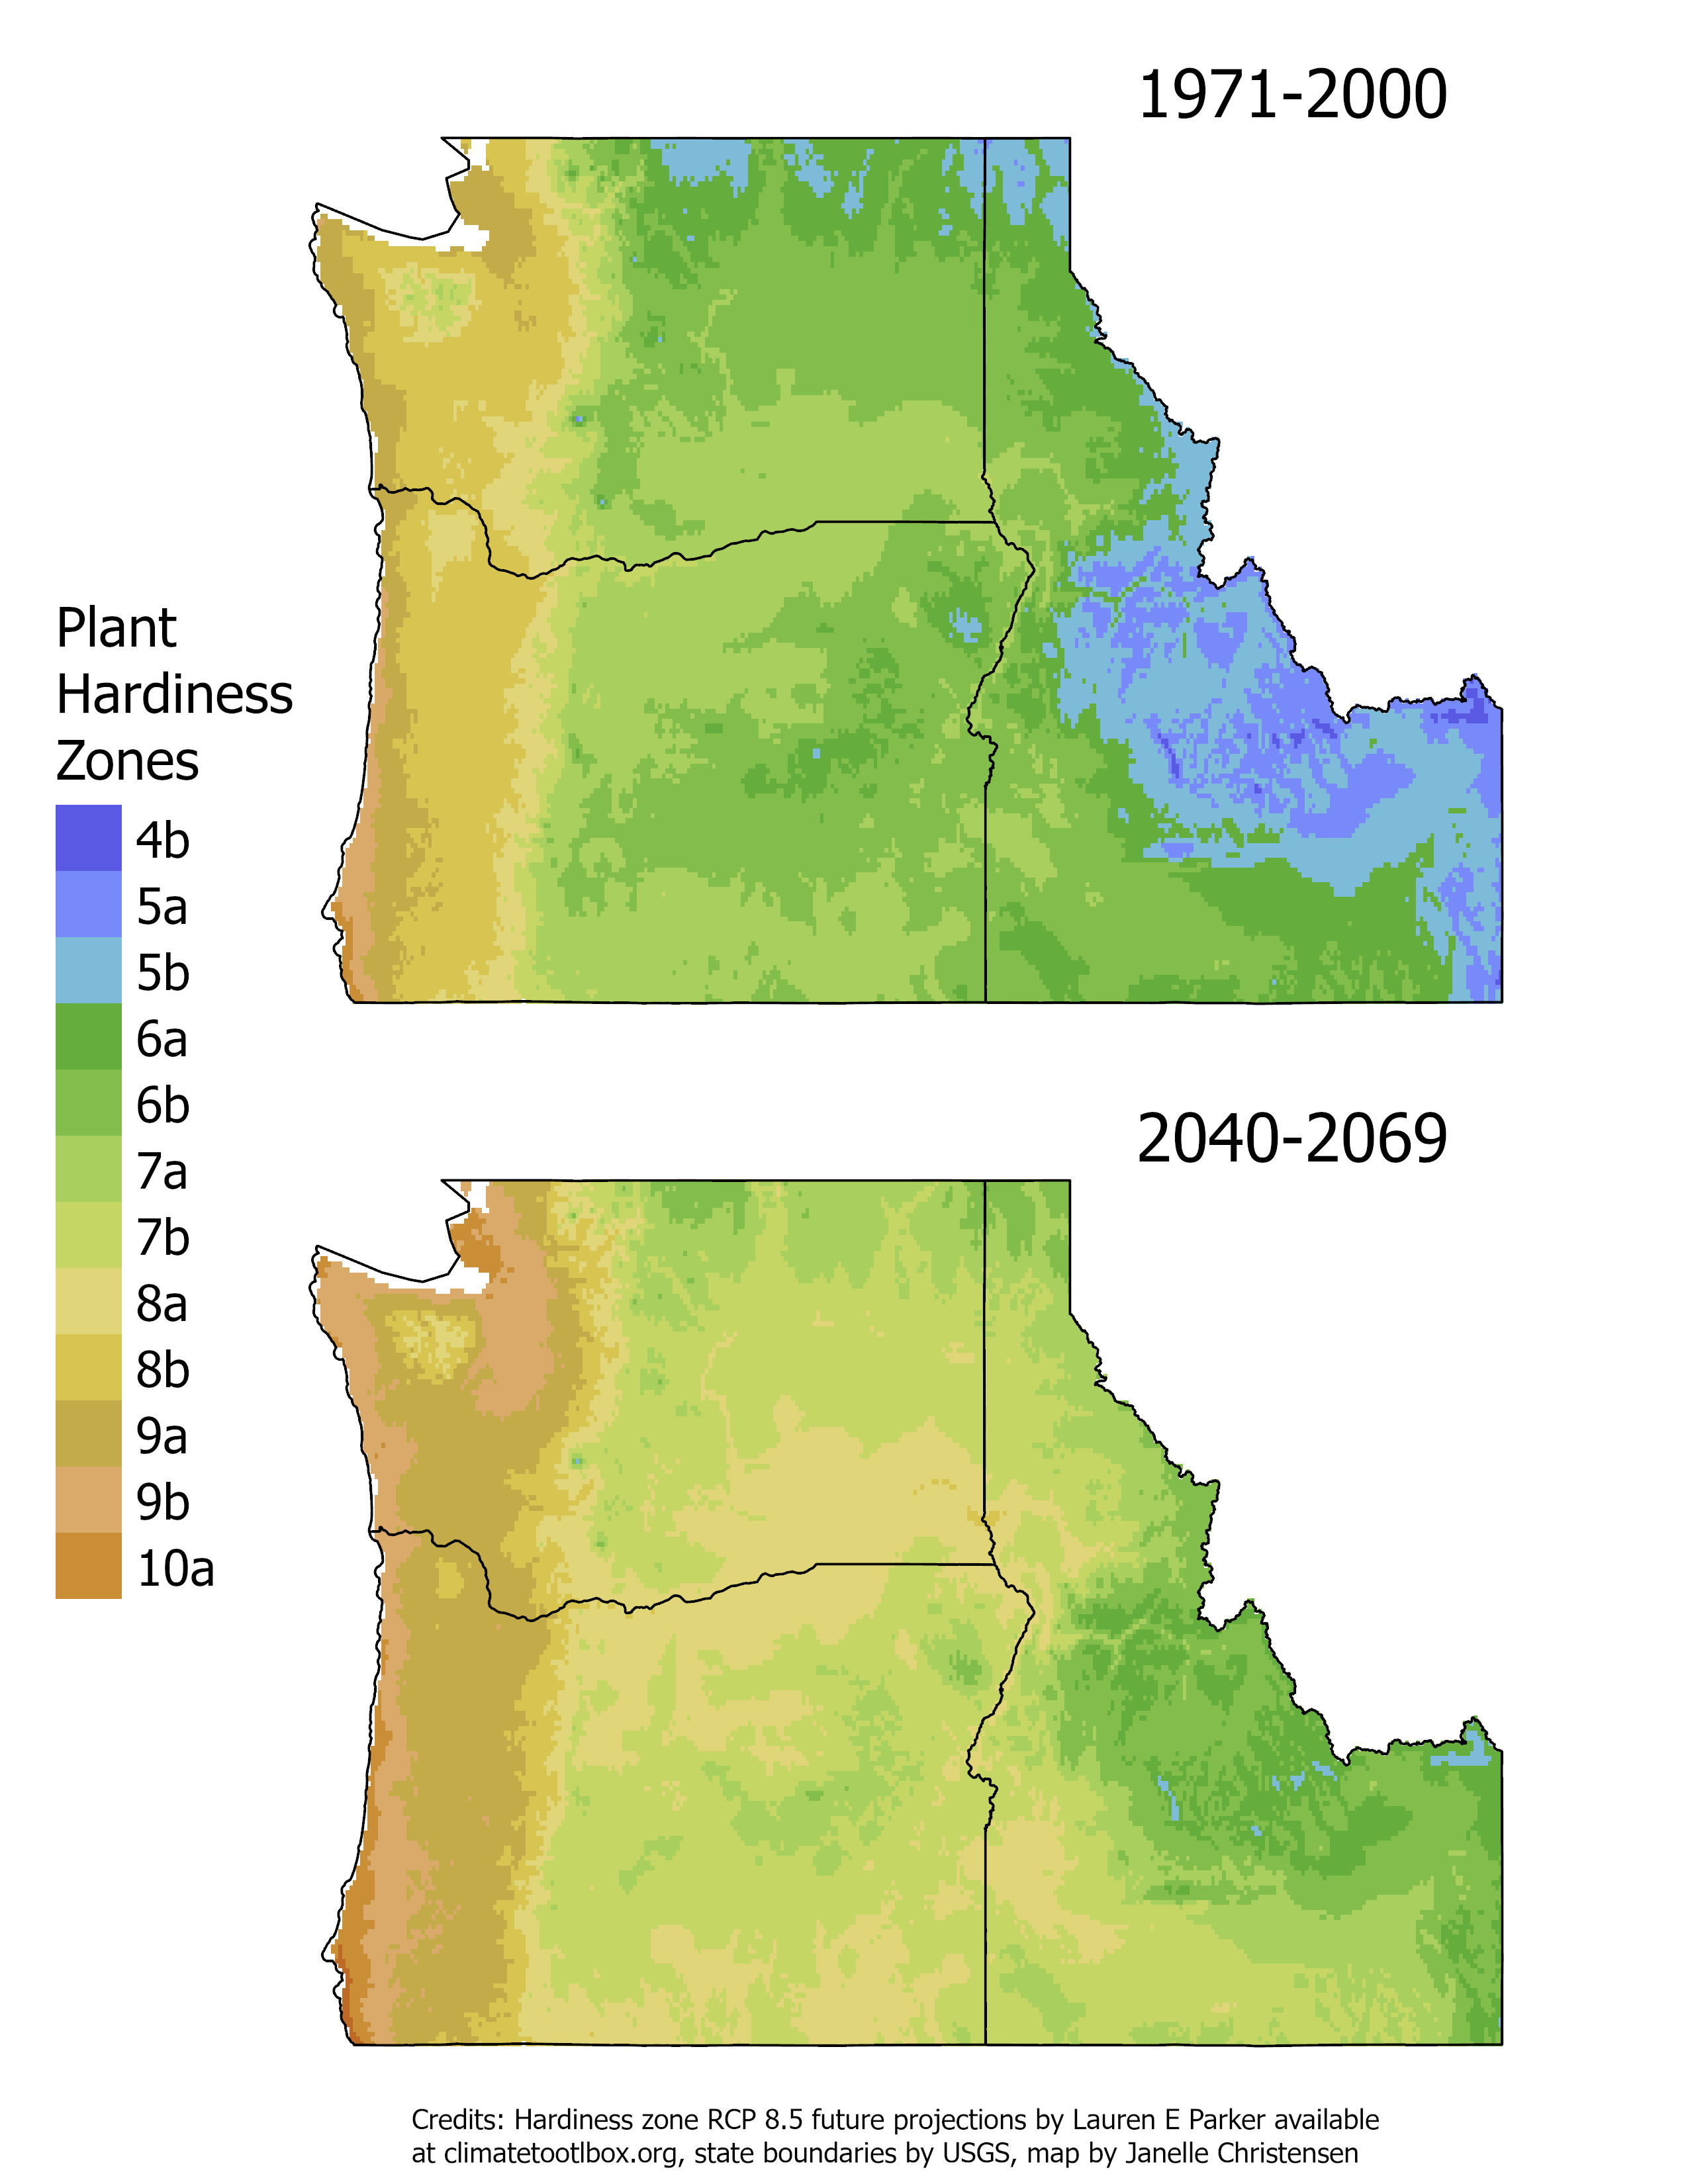 Two maps: the first shows hardiness zones now and the second shows hardiness zones in 2040. In the second map, hardiness zones have shifted northward.